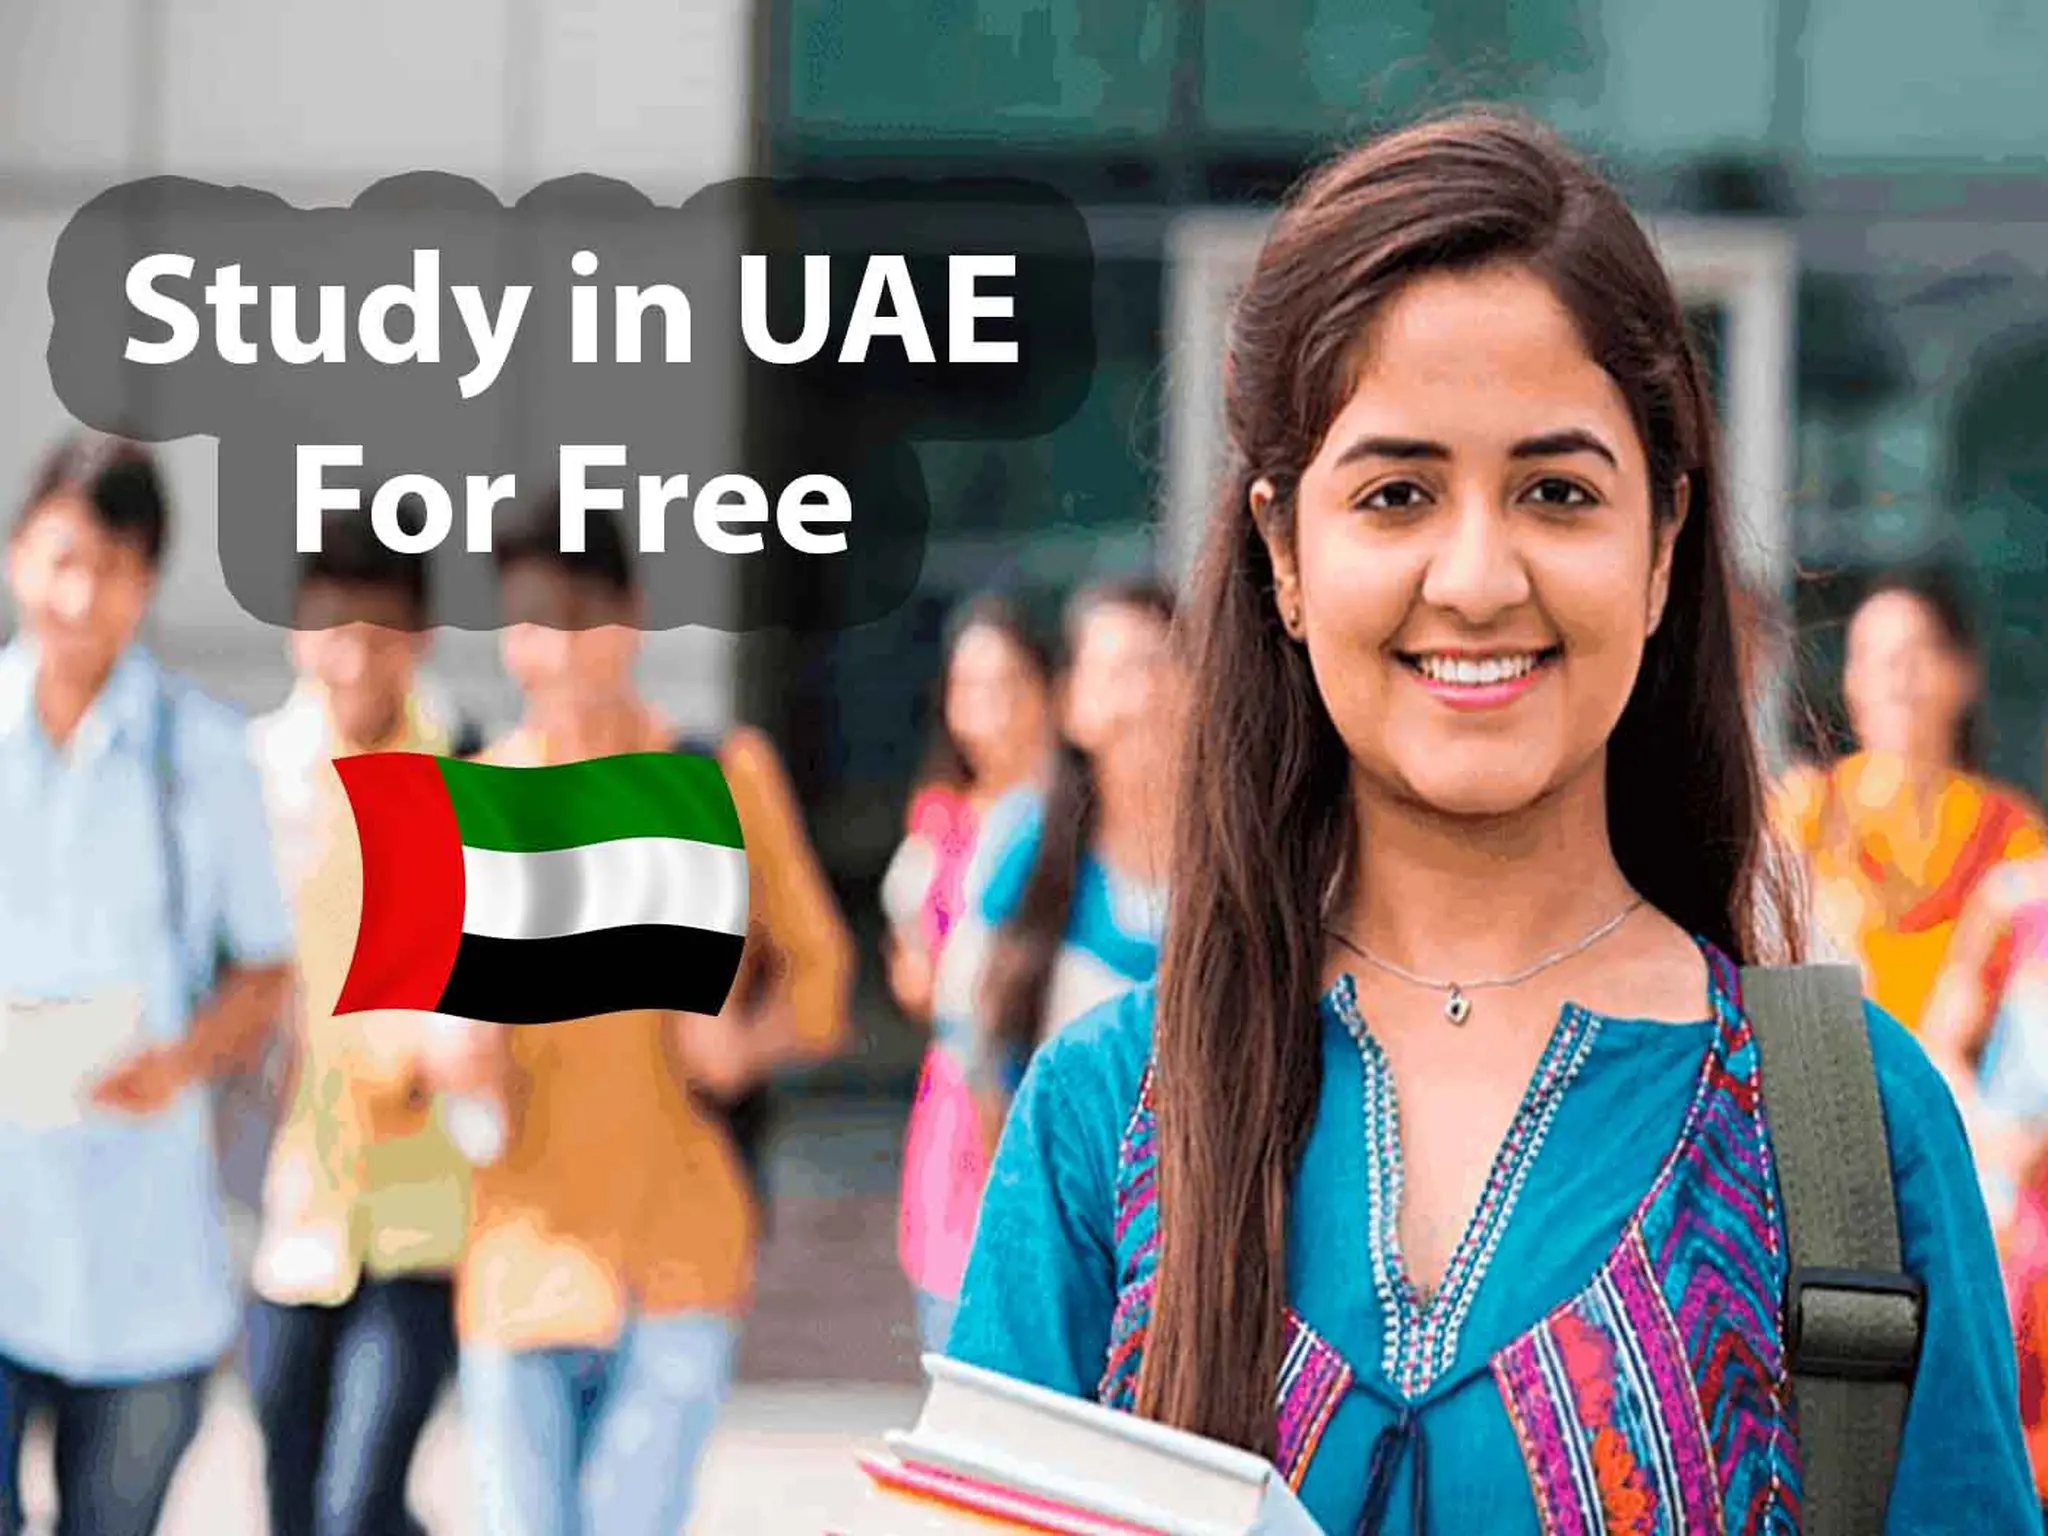 The UAE provides free study for international students with covering housing and visa costs